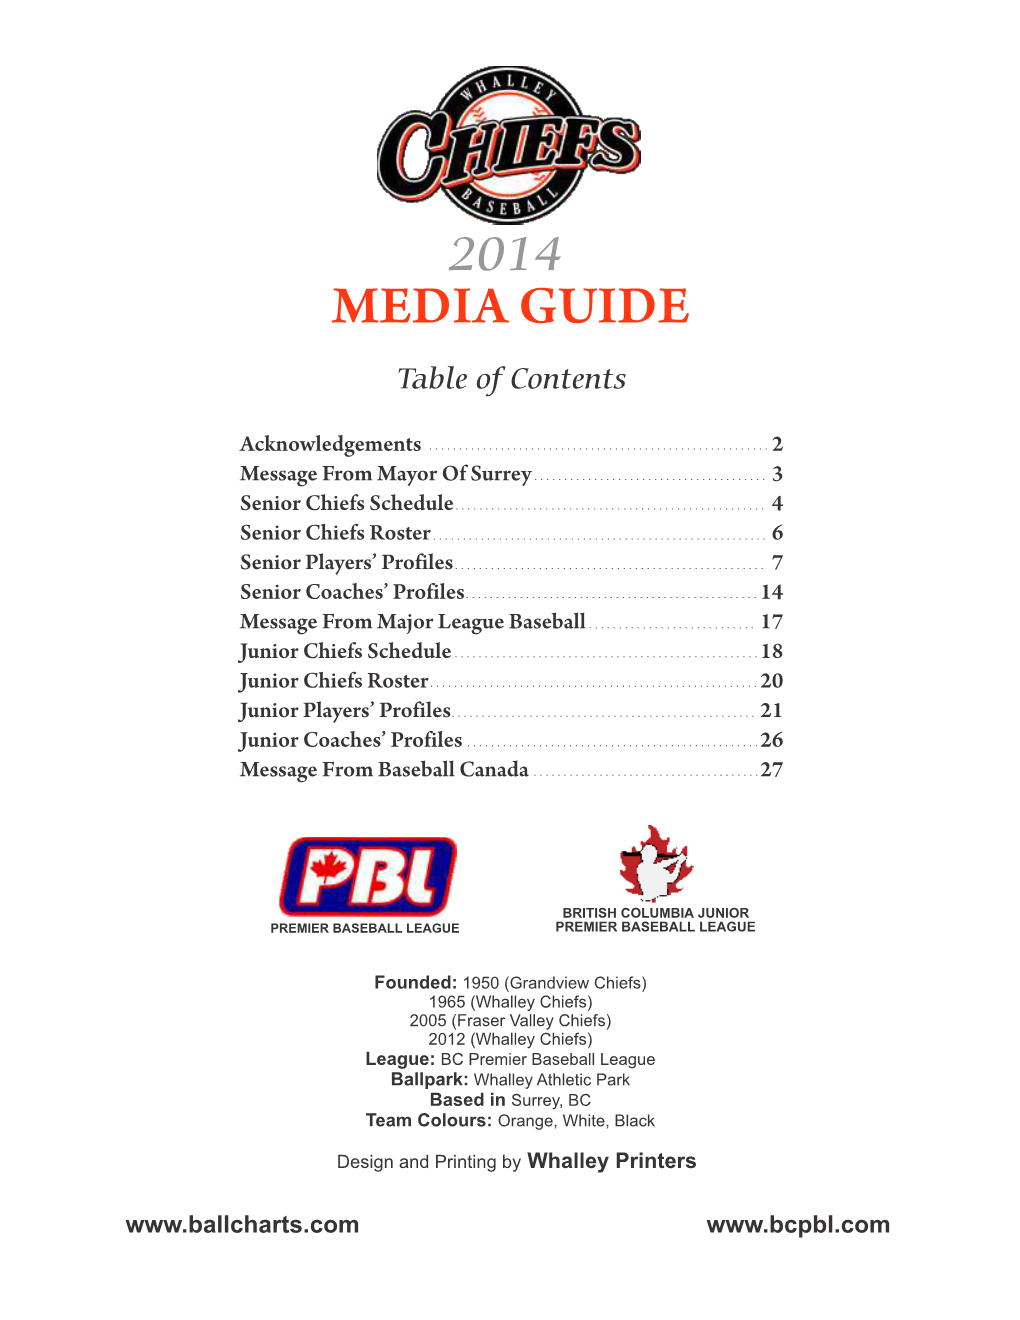 MEDIA GUIDE Table of Contents